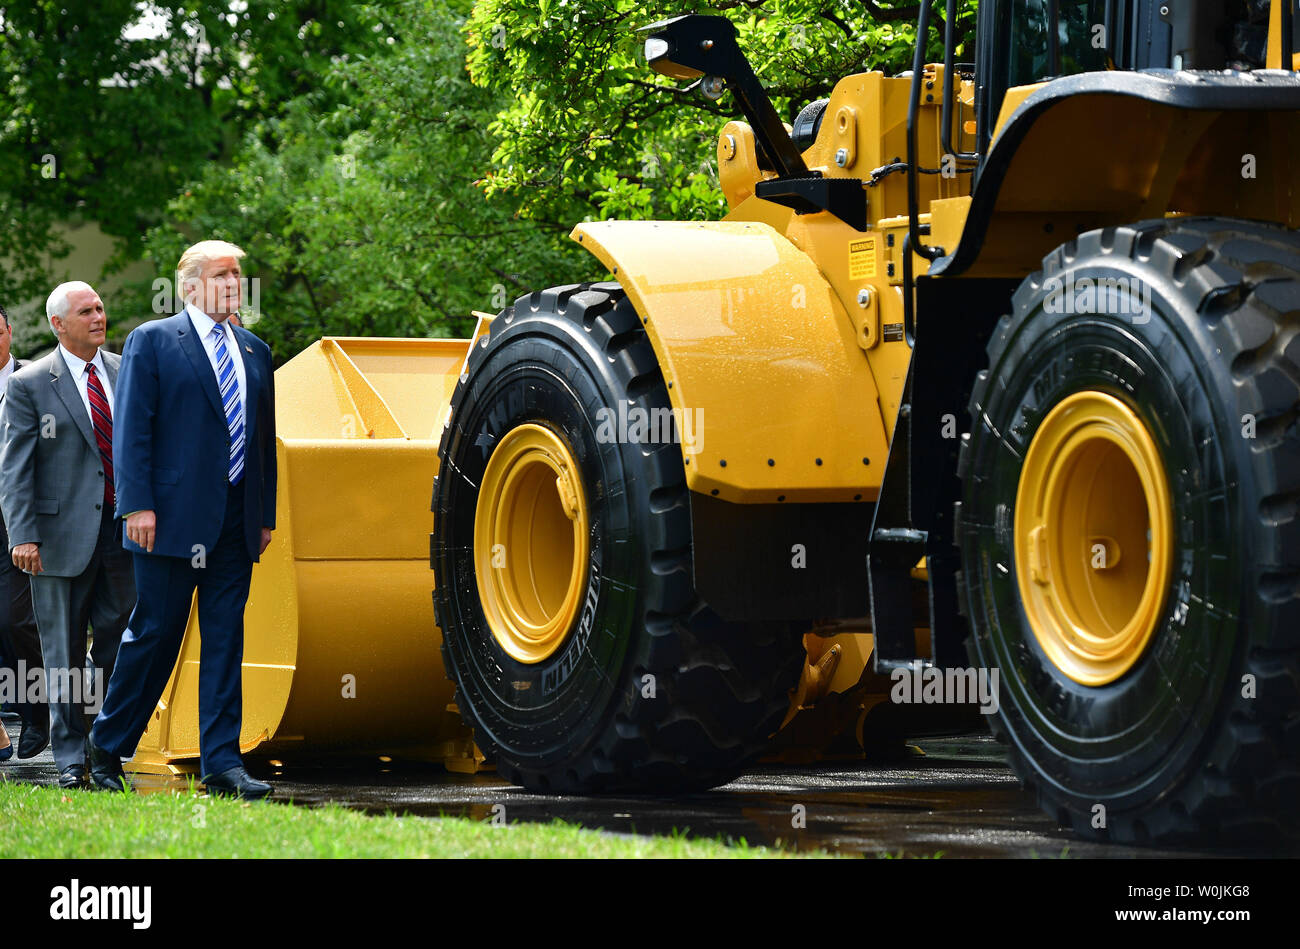 President Donald Trump (R) and Vice President Mike Pence inspect a Caterpillar front end loader during a Made in America product showcase, on the South Lawn of the White House in Washington, D.C. on July 17, 2017. Trump hosted manufacturers and corporations for all 50 states to highlight American made products. Photo by Kevin Dietsch/UPI Stock Photo